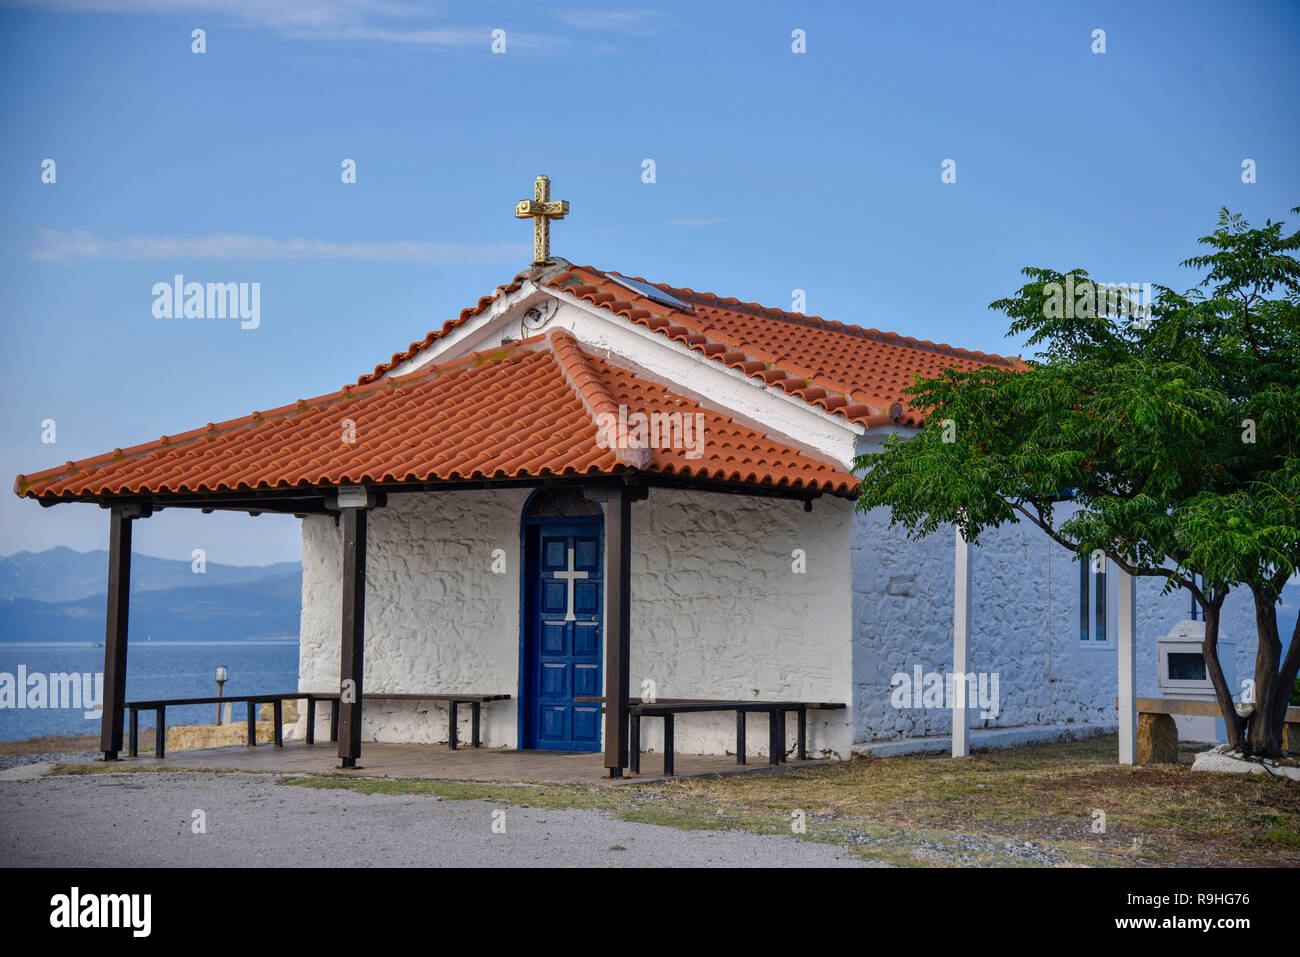 The road to the Orthodox Church in Bulgaria Stock Photo